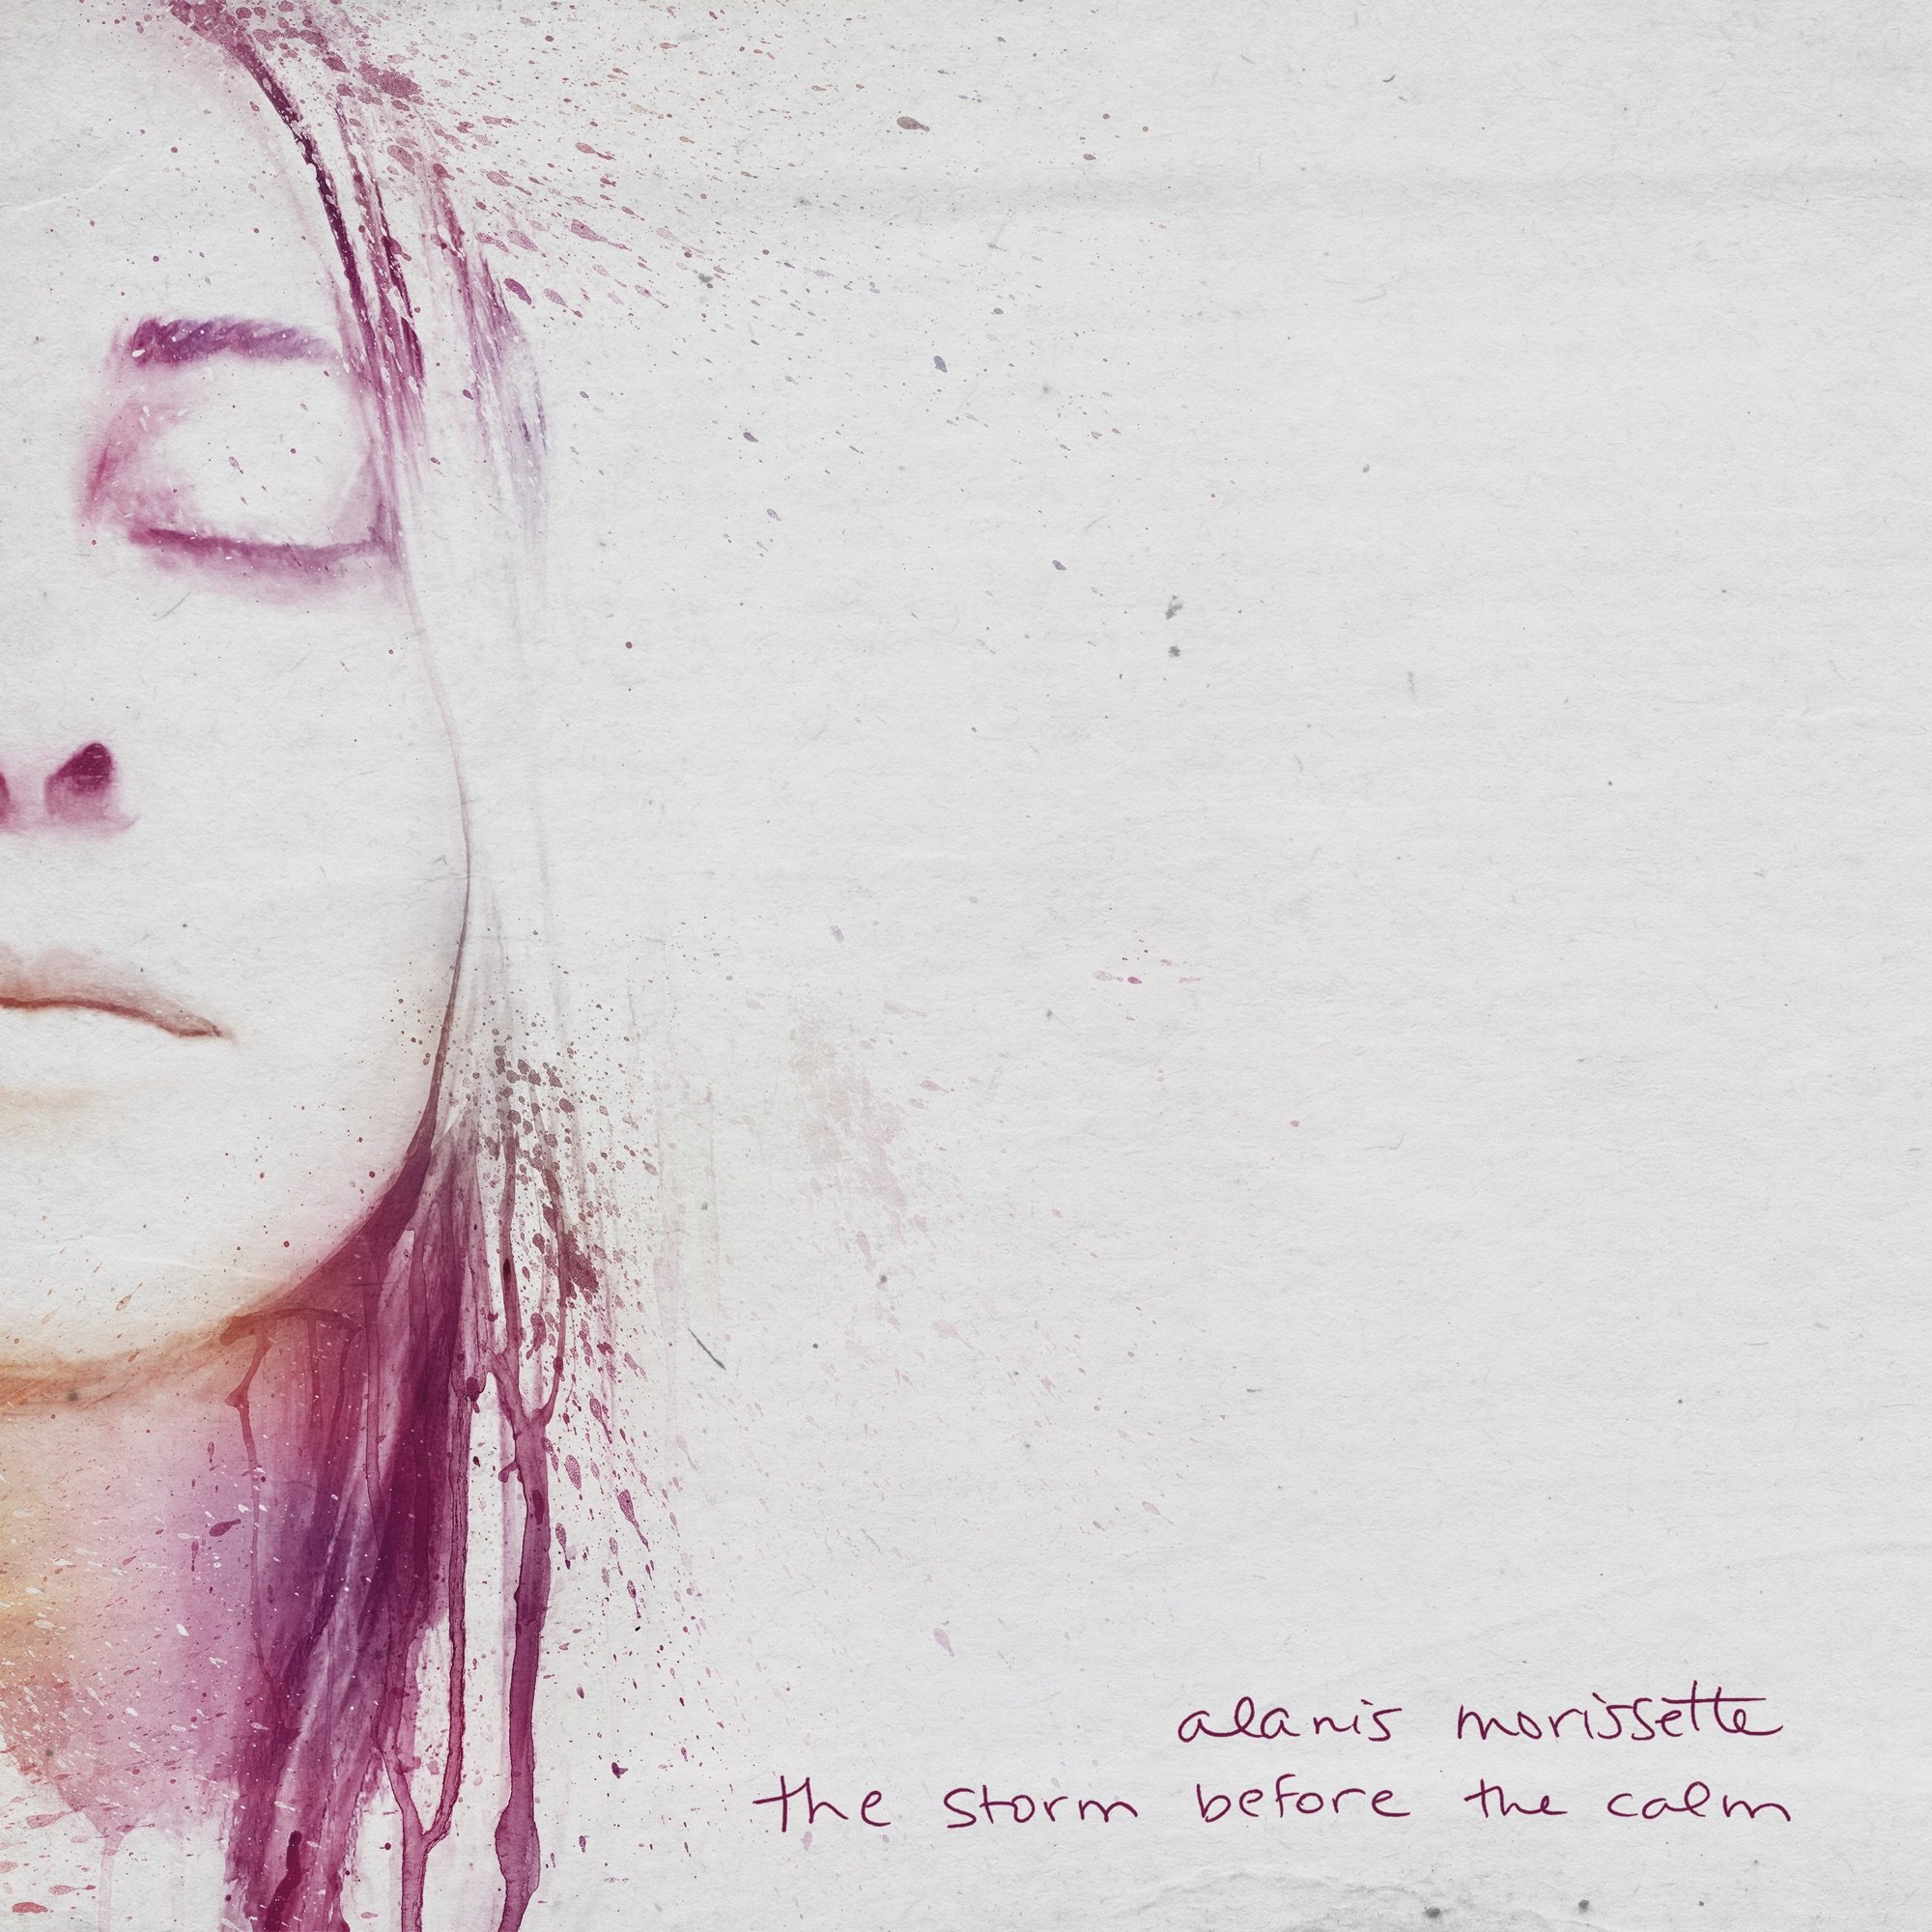 Alanis Morissette - The Storm Before the Calm (2022) FLAC Download